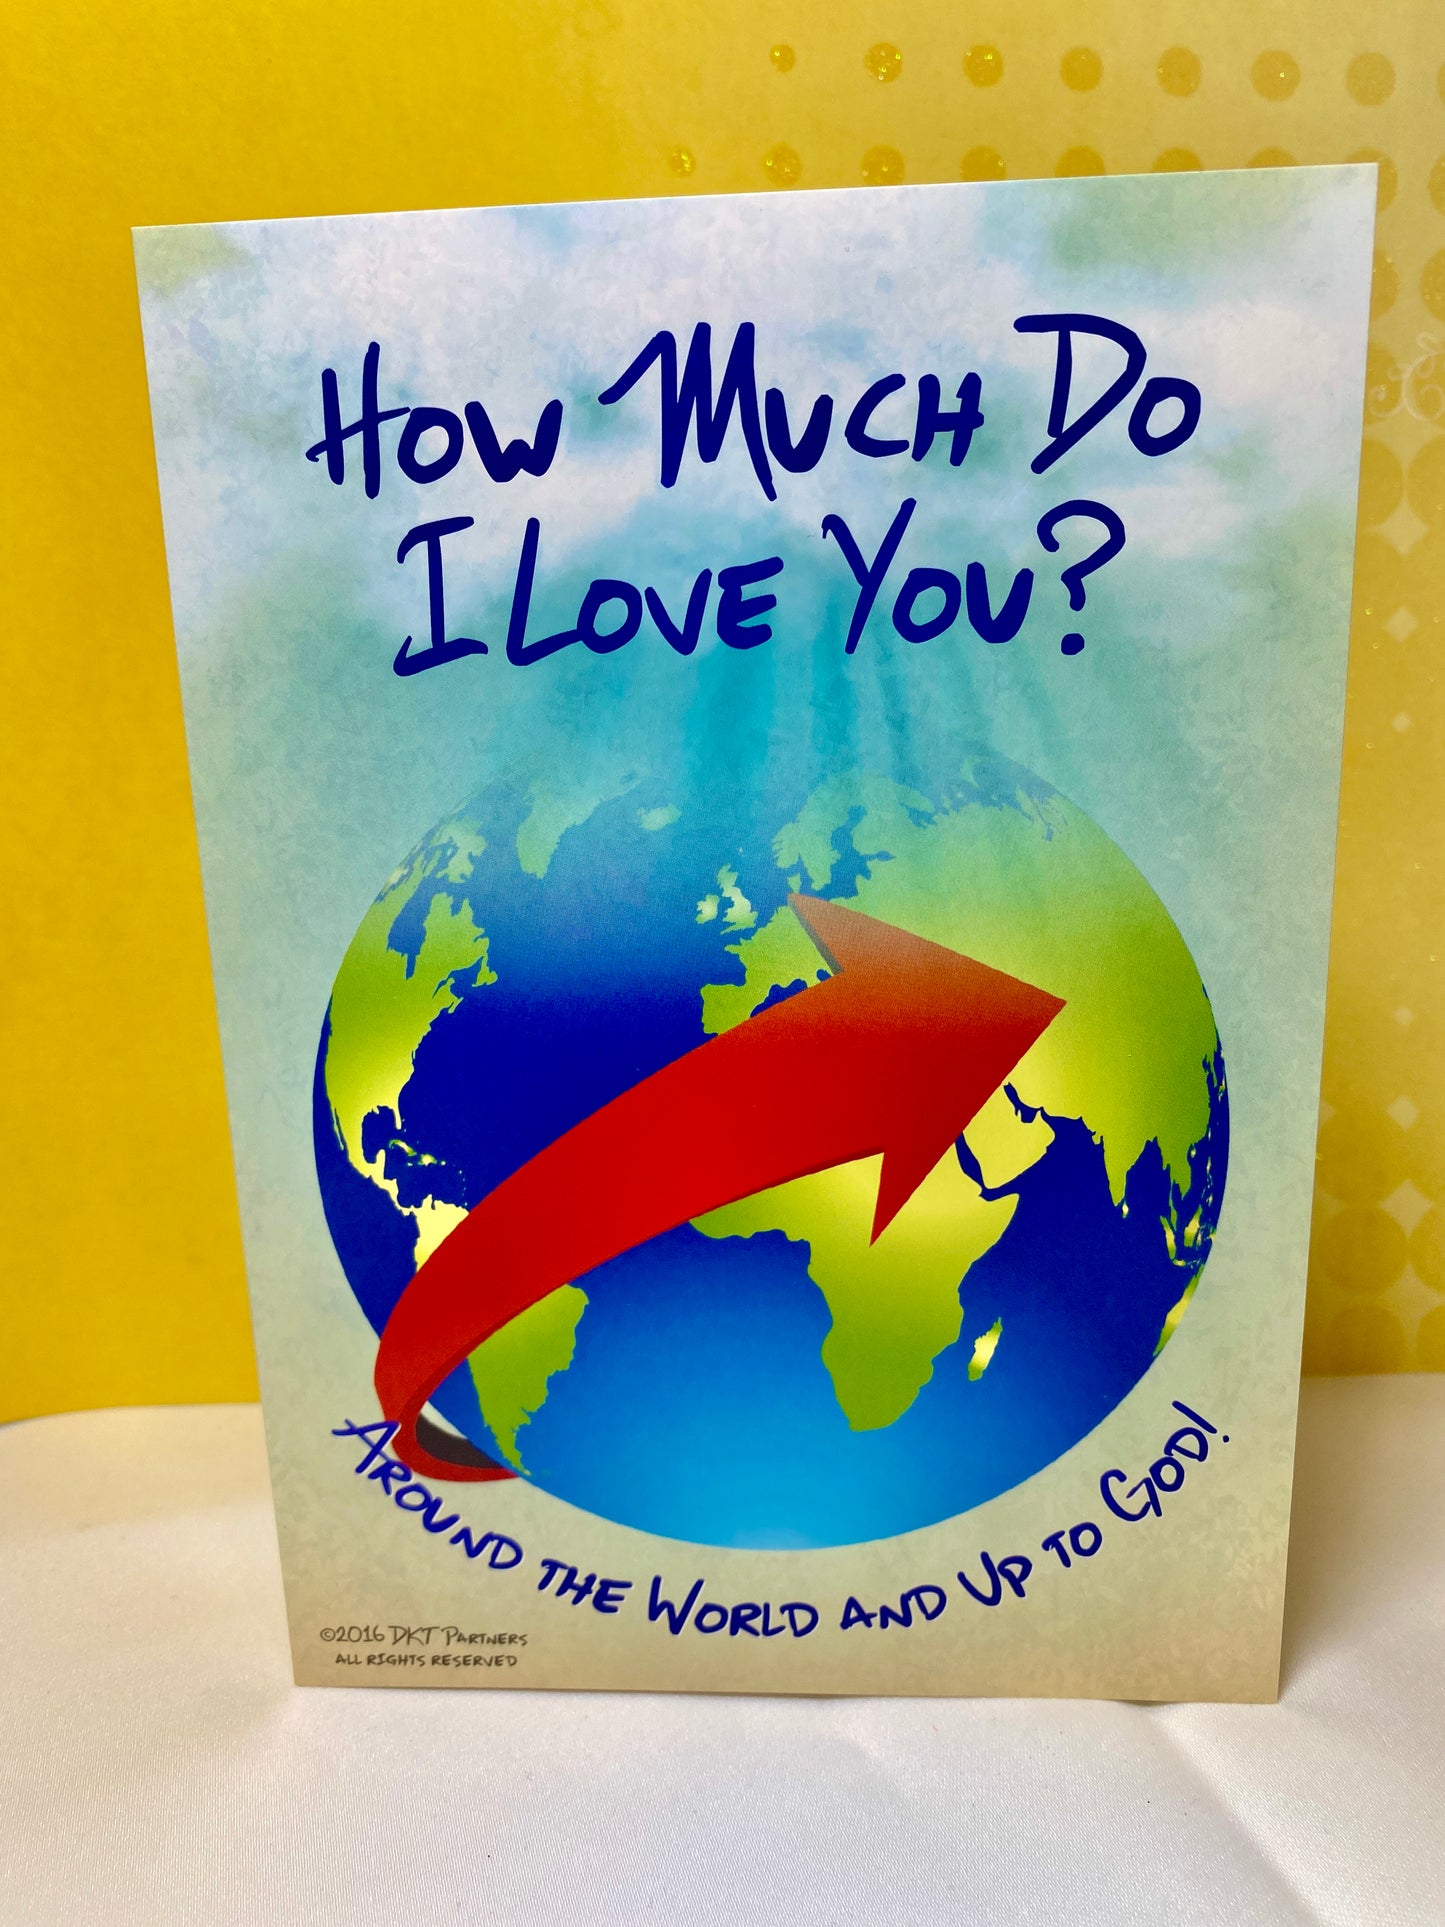 The full front of the "How Much Do I Love You?" greeting card.